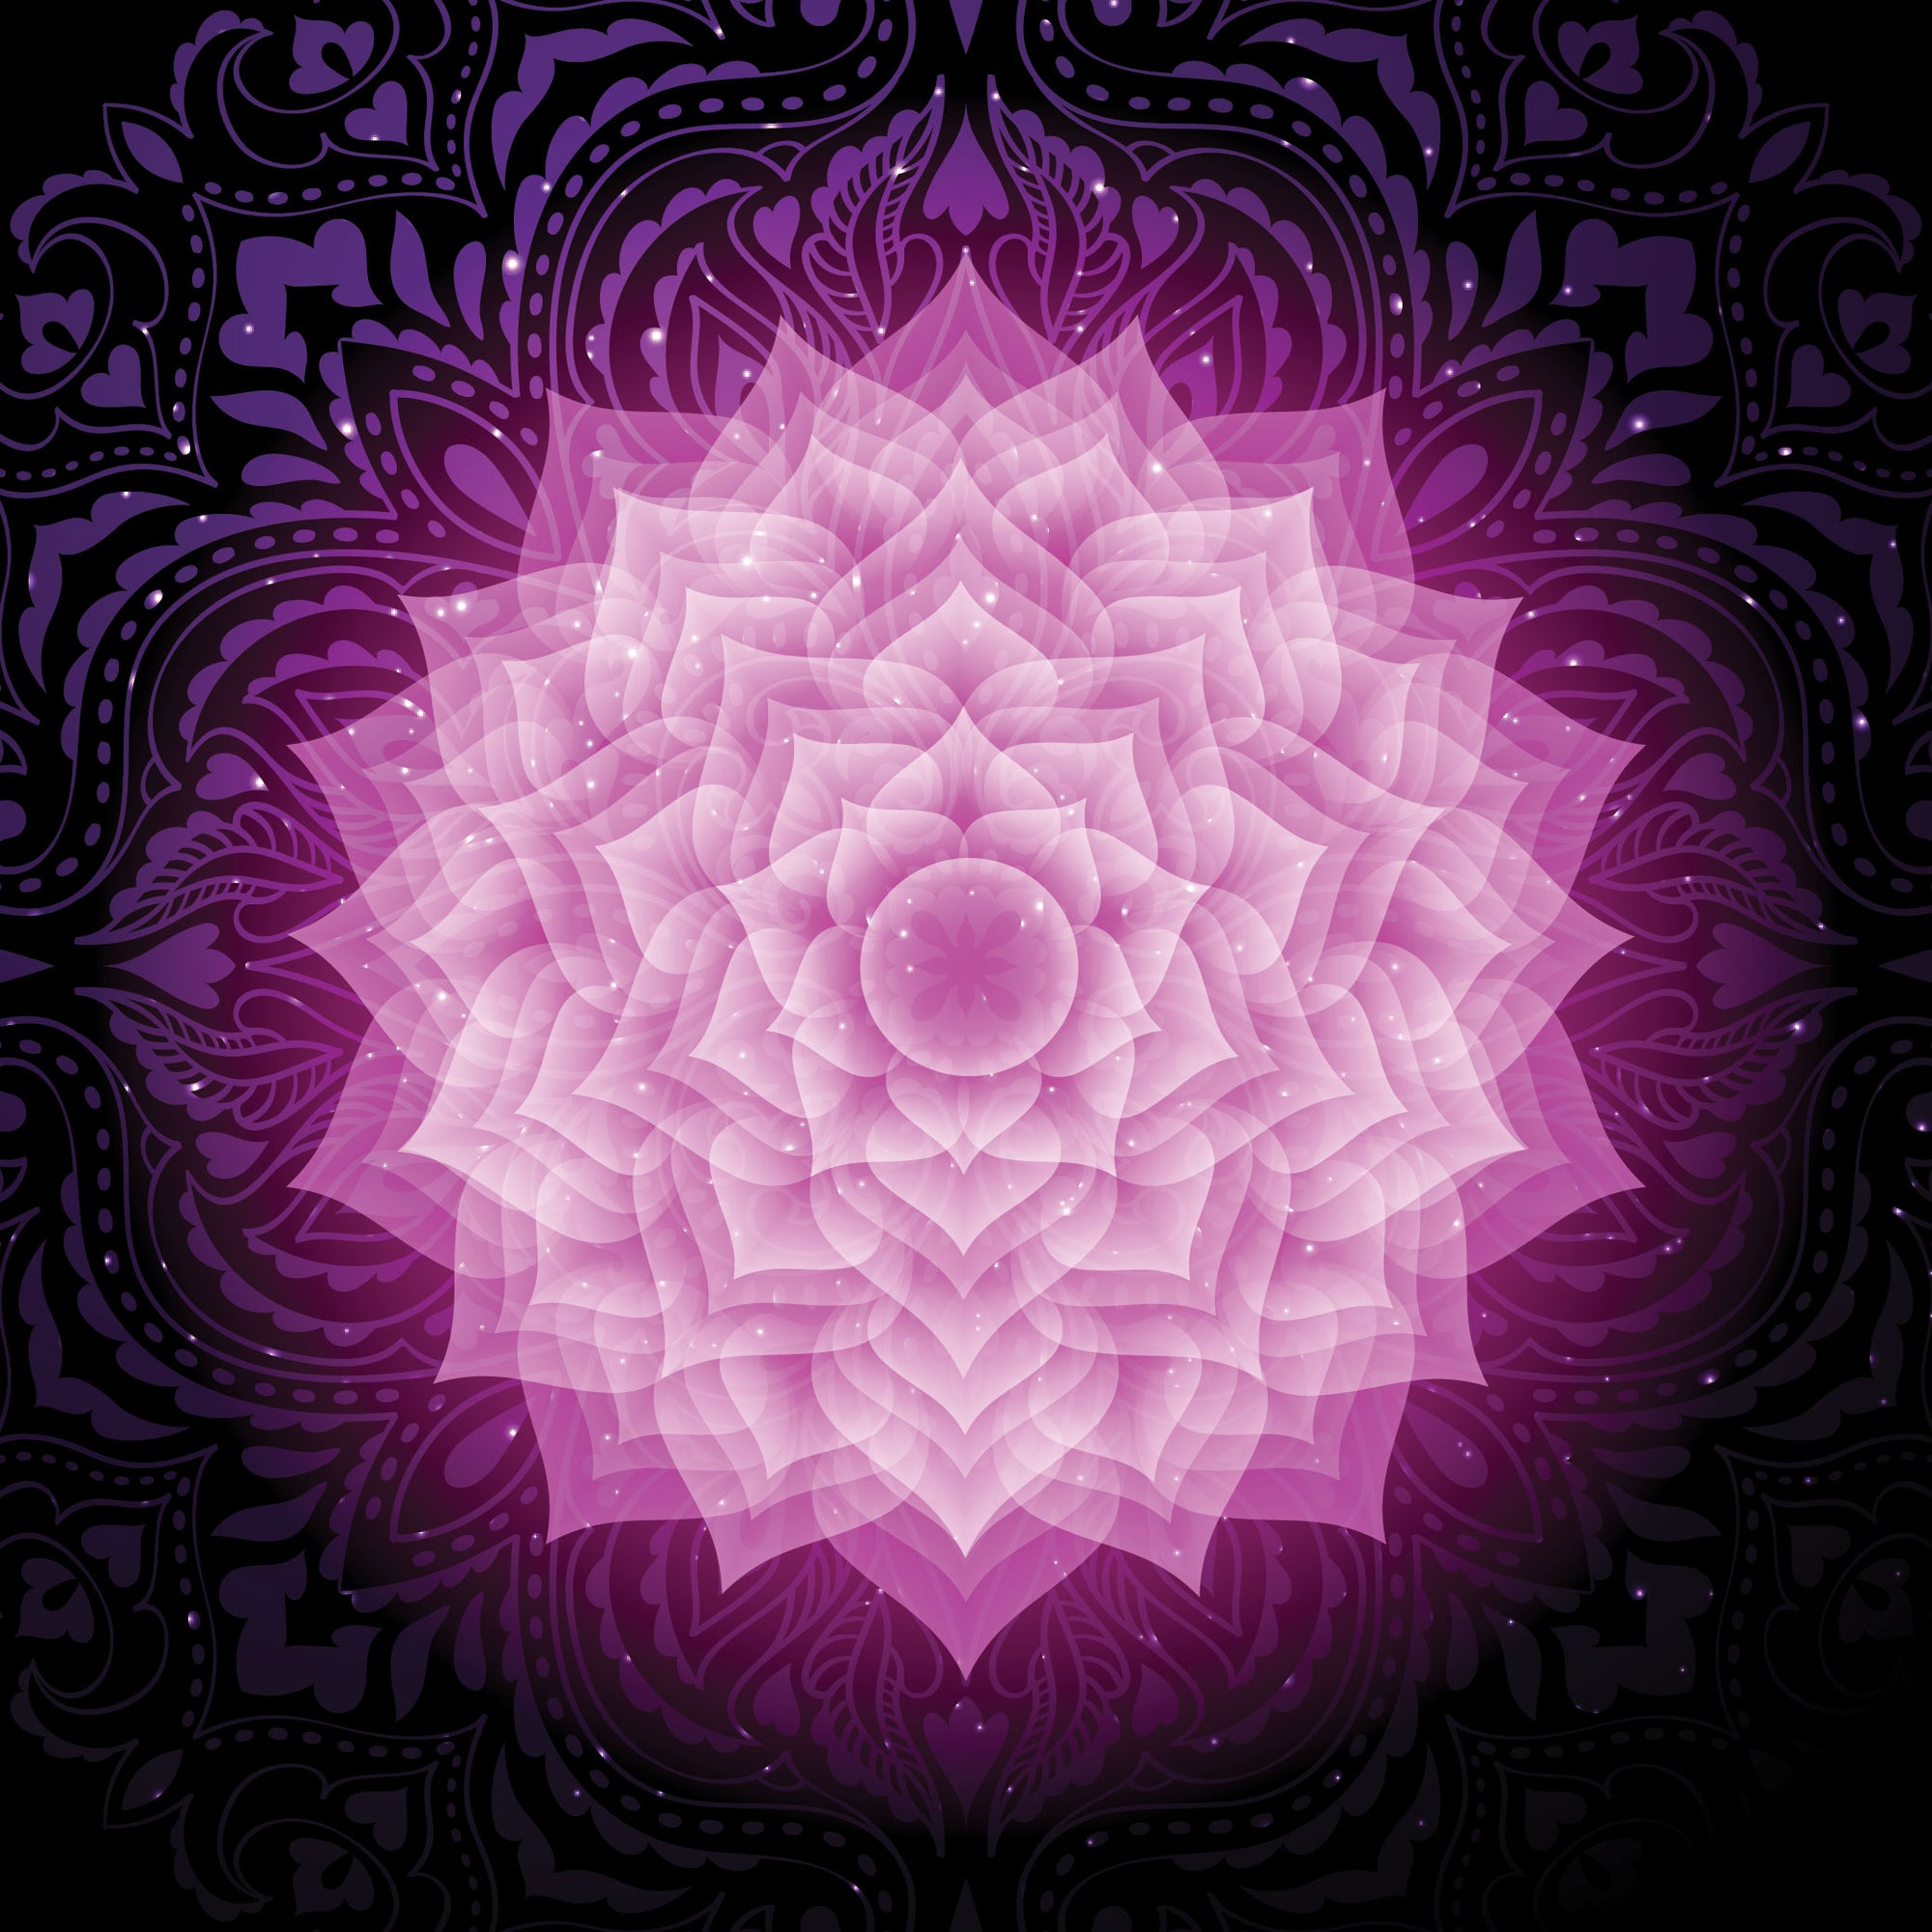 Crown Chakra Opening Meditation by Teal Swan